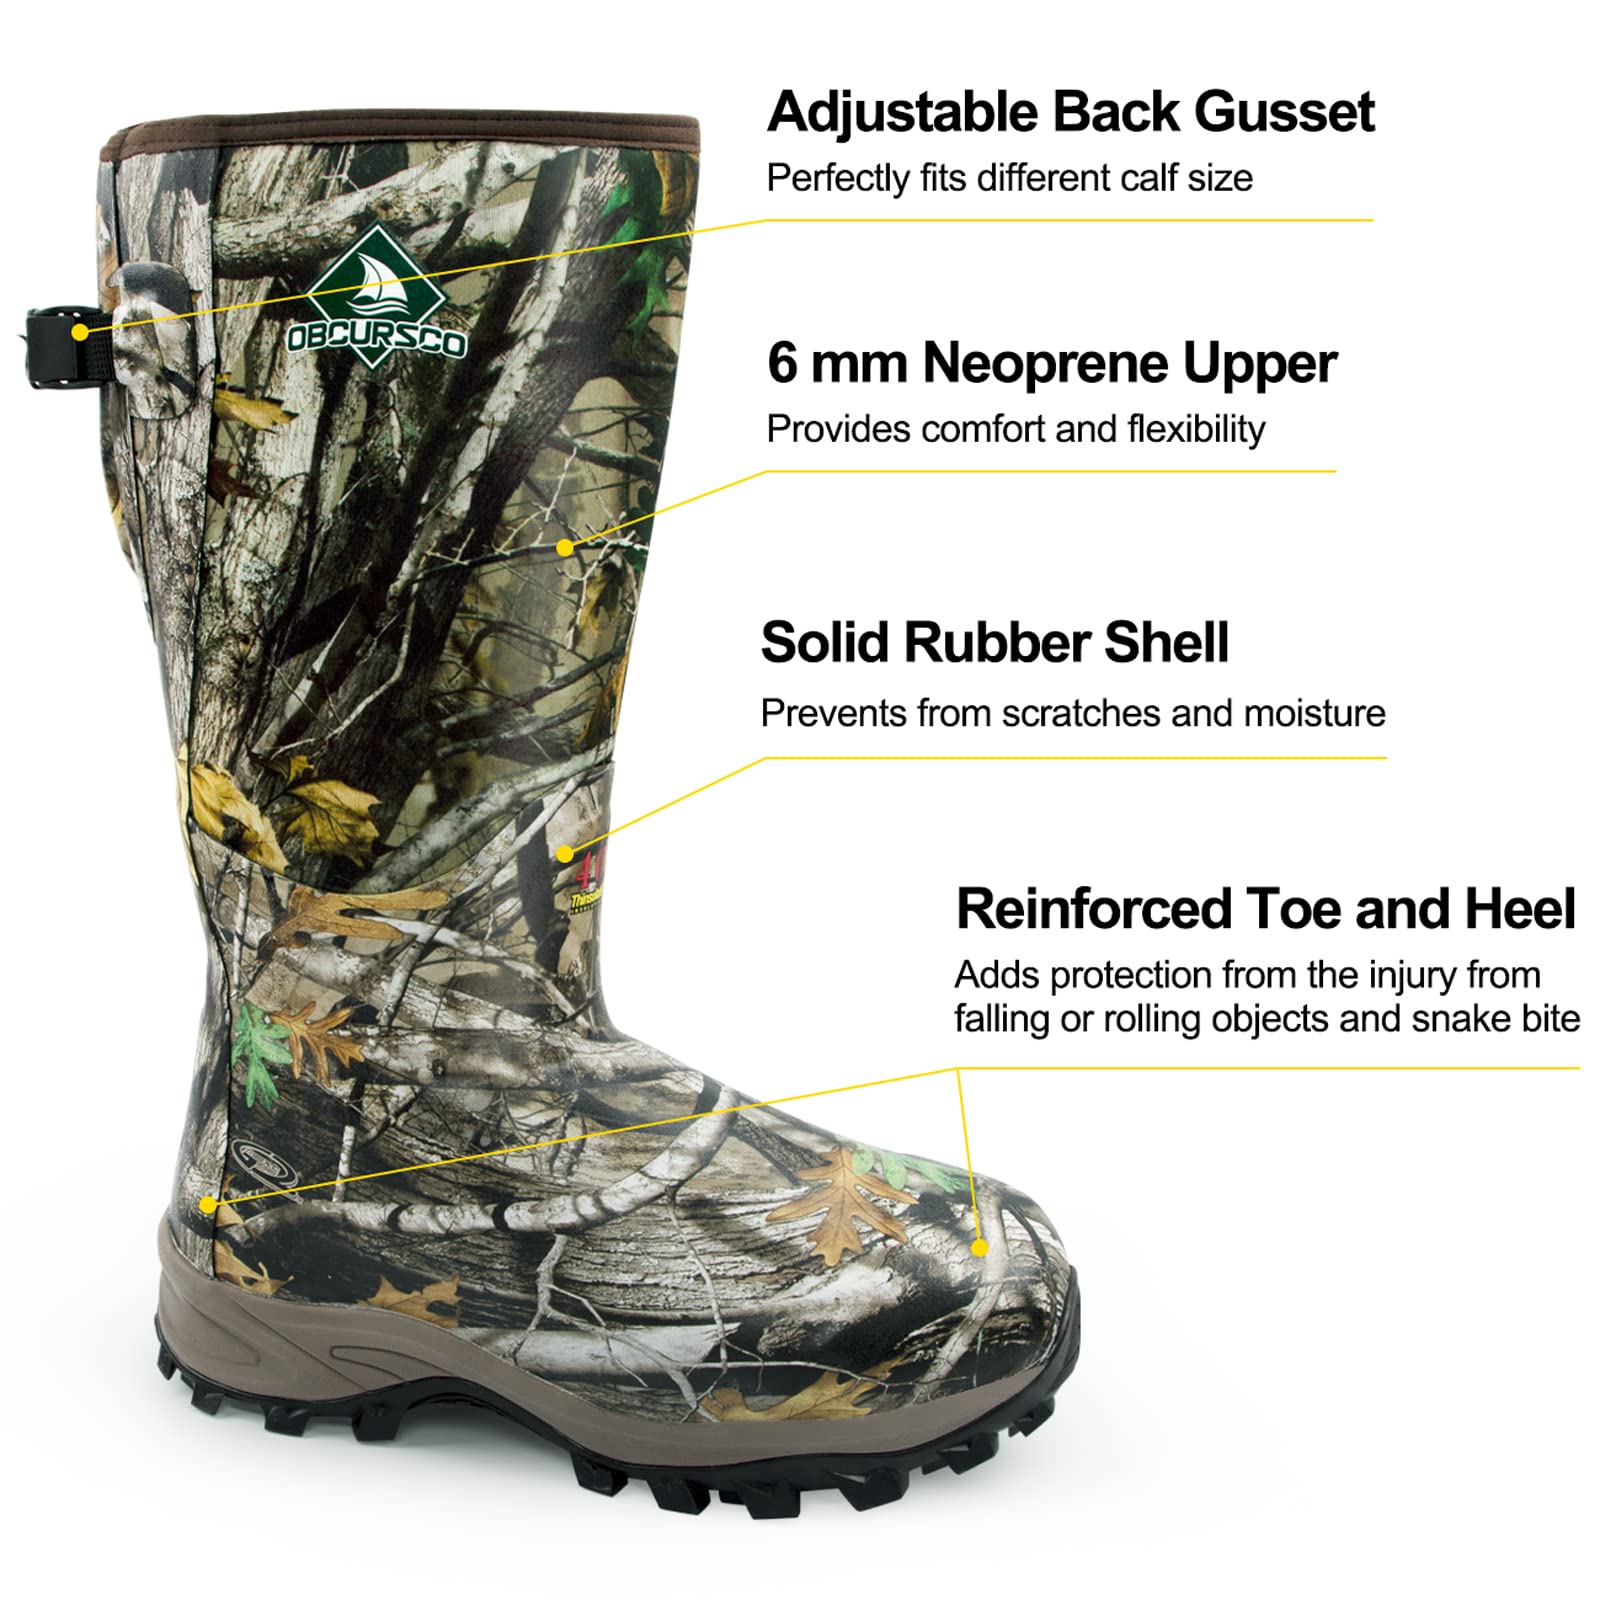 Obcursco 400g Insulation Rubber Hunting Boots for Men, Insulated Waterproof 6mm Neoprene Boot for Hunting (Camo)